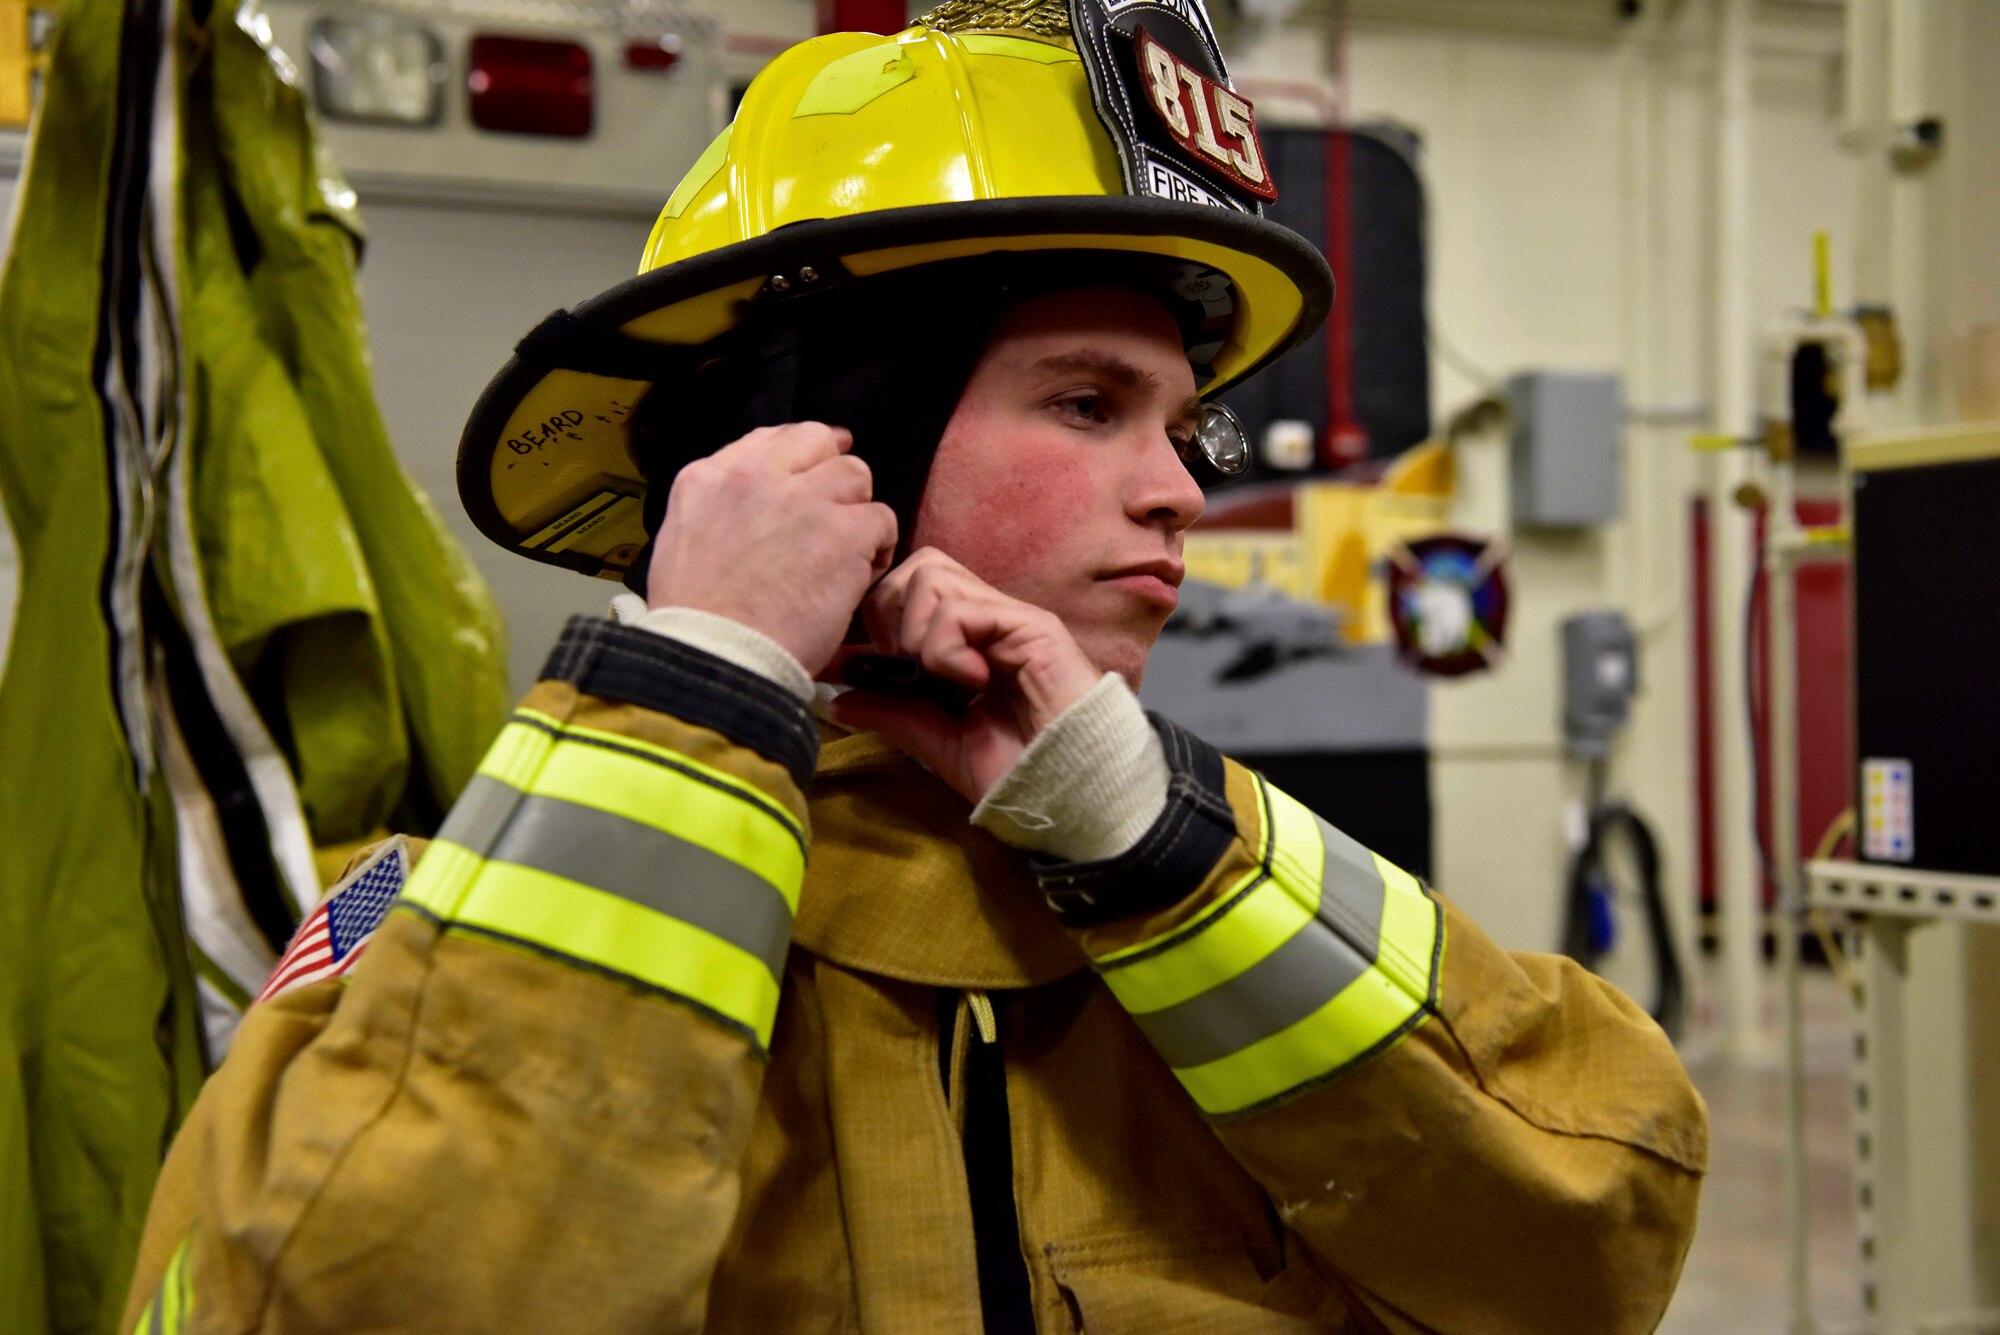 Airman 1st Class Taylor Beard, a 354th Civil Engineer Squadron firefighter, dons fire protection equipment during a training exercise on Eielson Air Force Base, Alaska, March 26, 2020. Eielson firefighters wear approximately 40 lbs. of gear when responding to a fire, their training involves donning the gear within 60 seconds to cut down their response time when they are called to an emergency situation. (U.S. Air Force photo by Senior Airman Beaux Hebert)